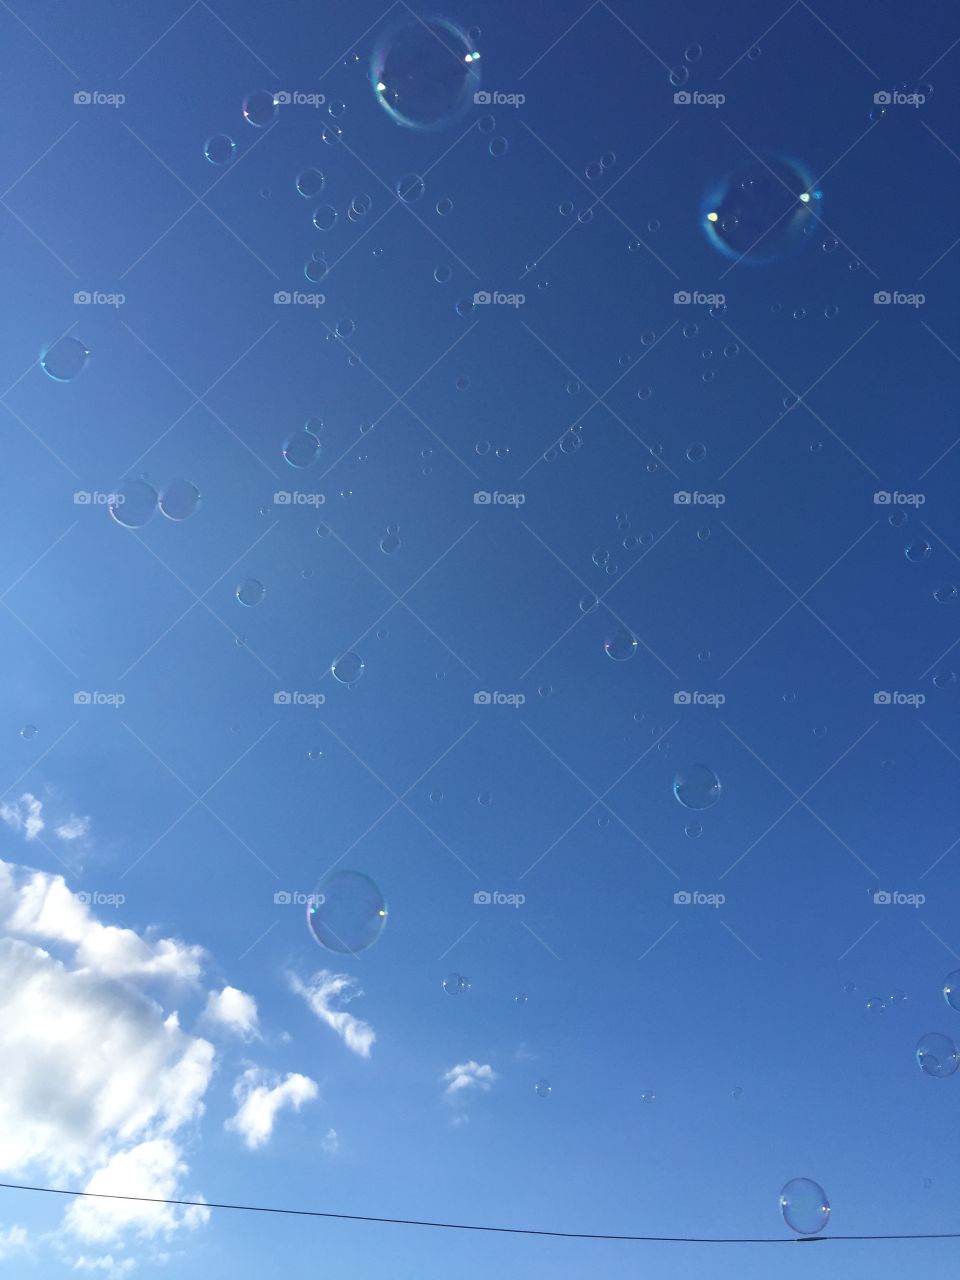 Bubbles fly by